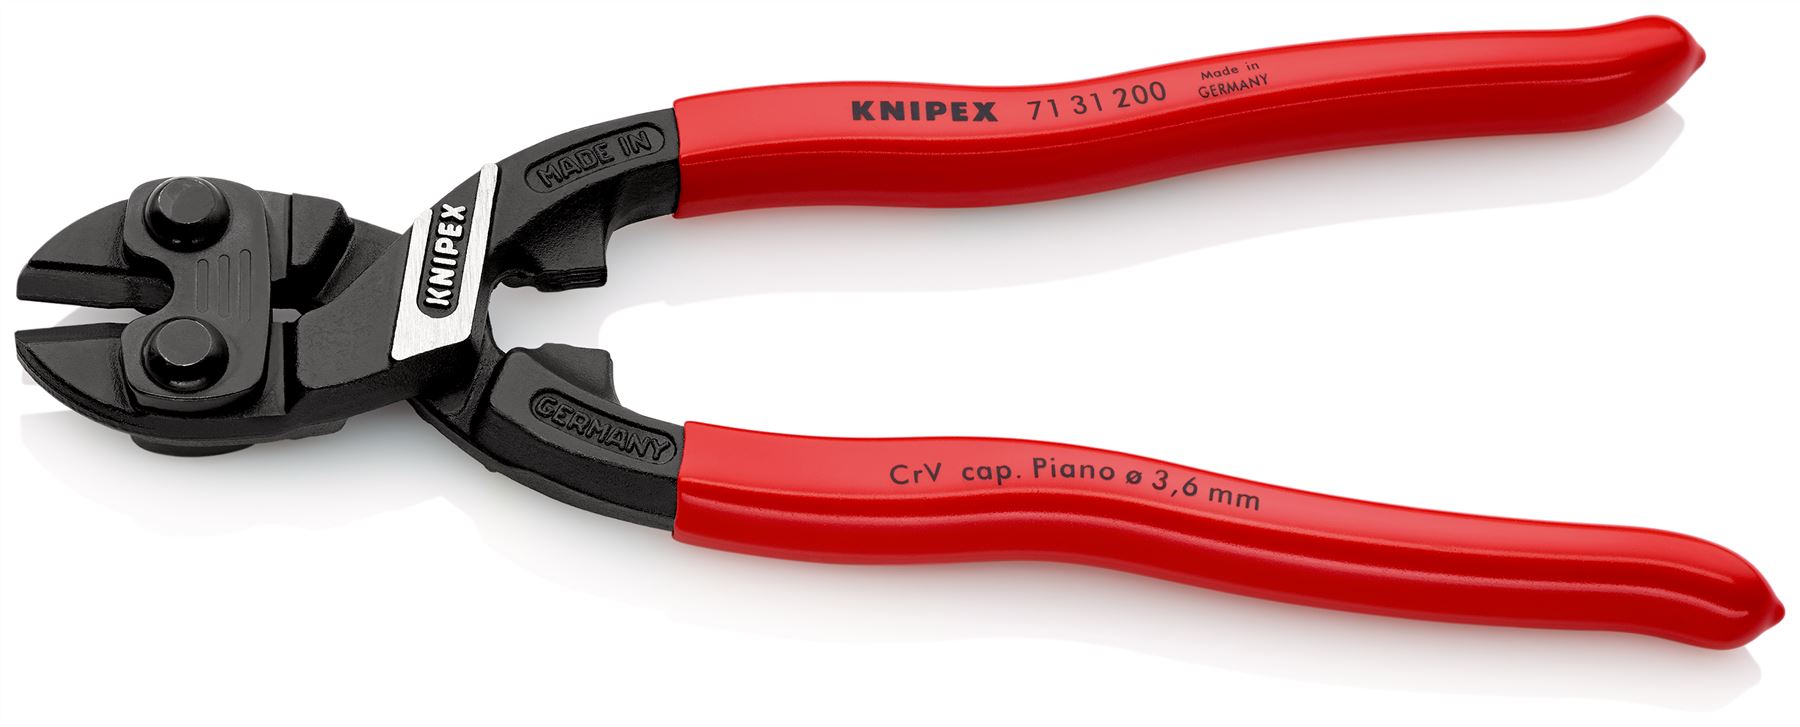 KNIPEX Compact Bolt Cutters CoBolt Cutting Pliers 200mm Plastic Coated Handles 71 31 200